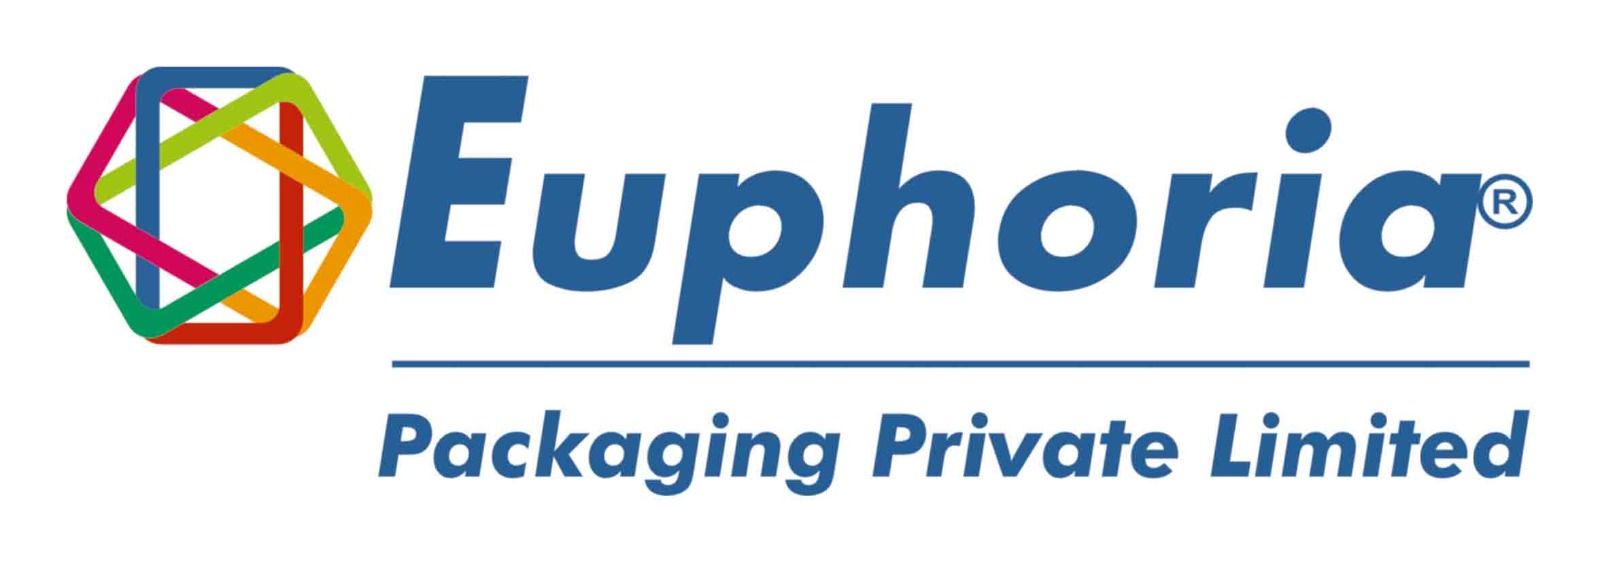 Euphoria Packaging Private Limited